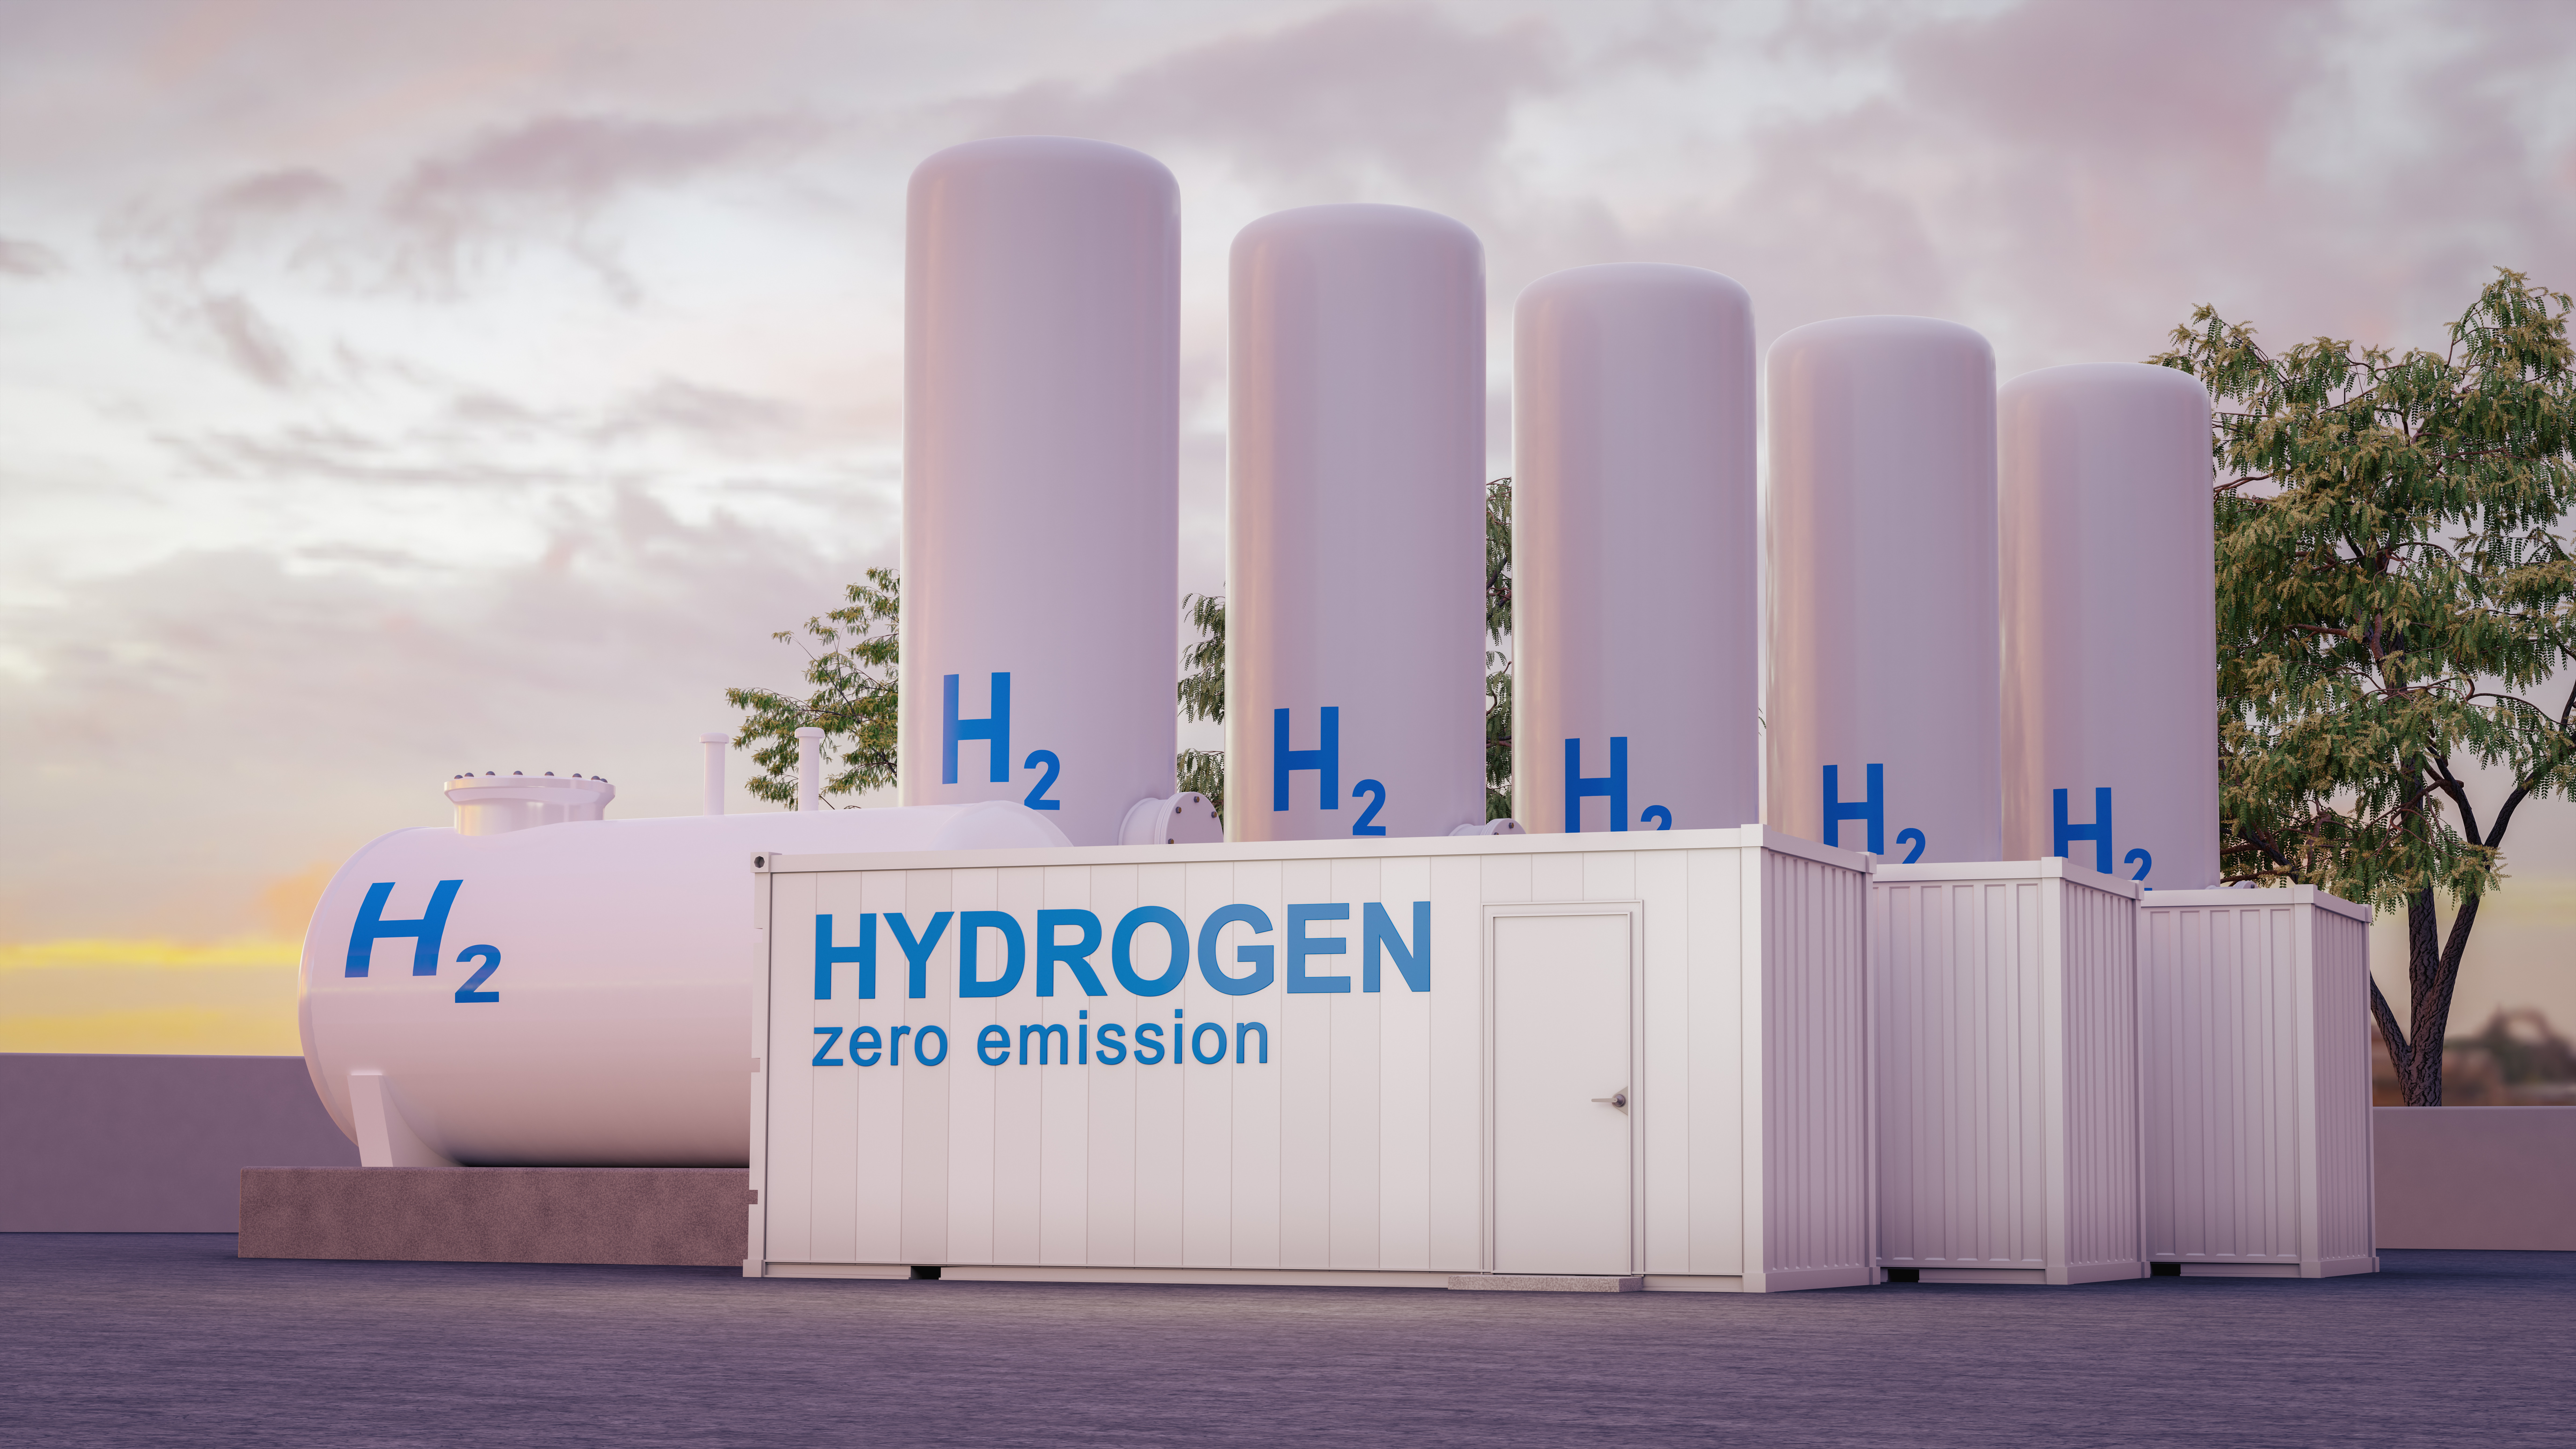 How to ensure hydrogen safety?